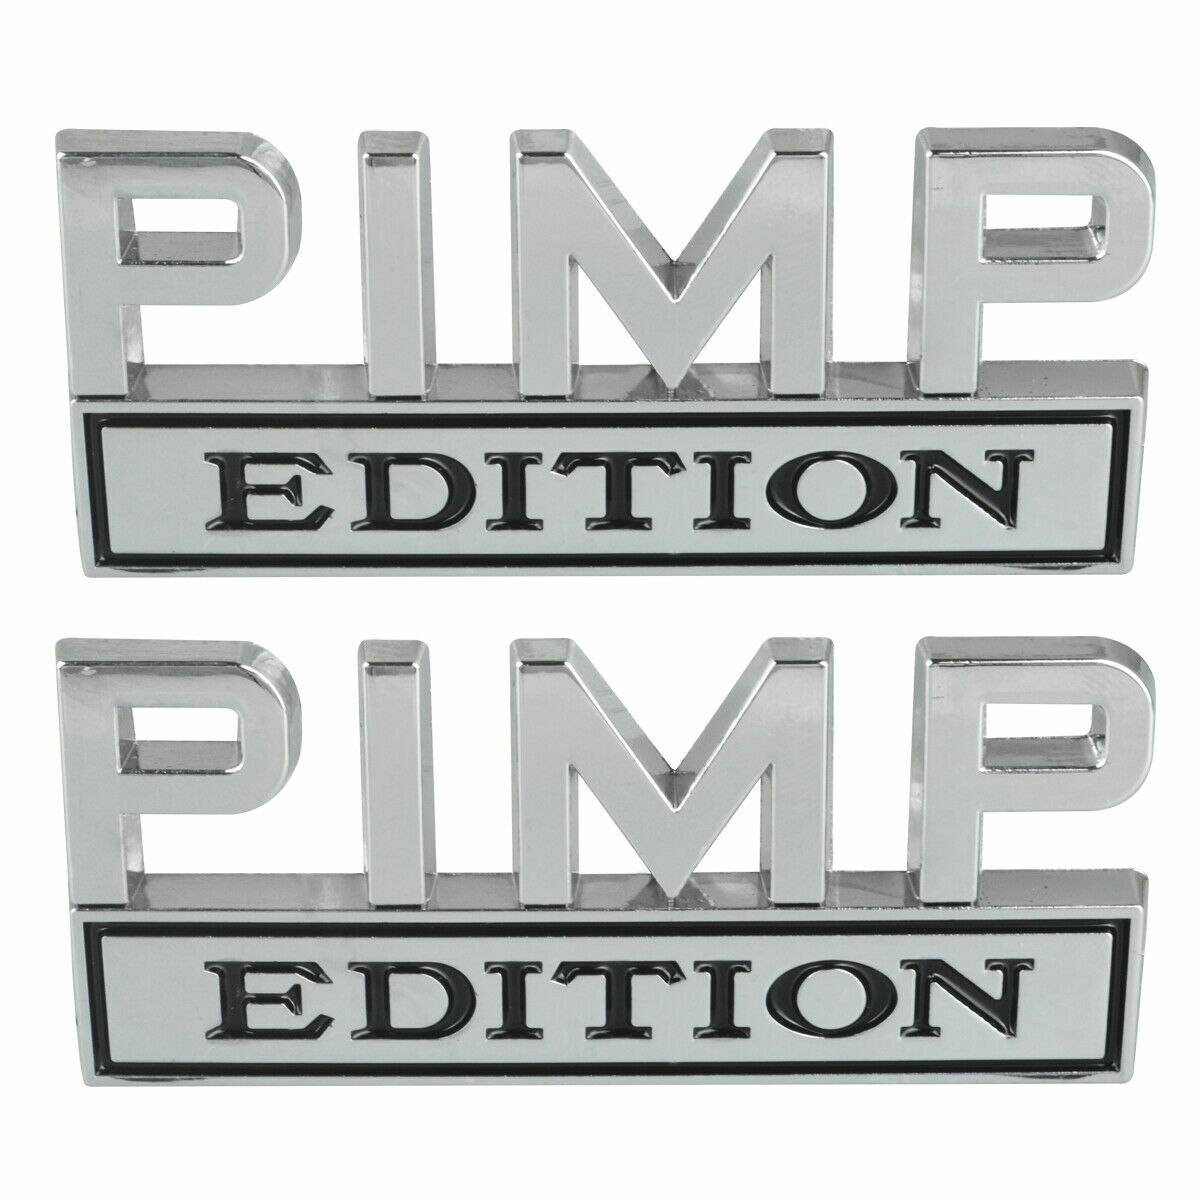 2pcs PIMP EDITION Emblem Decal Badges Stickers fit Ford Chevy Car Truck US STOCK